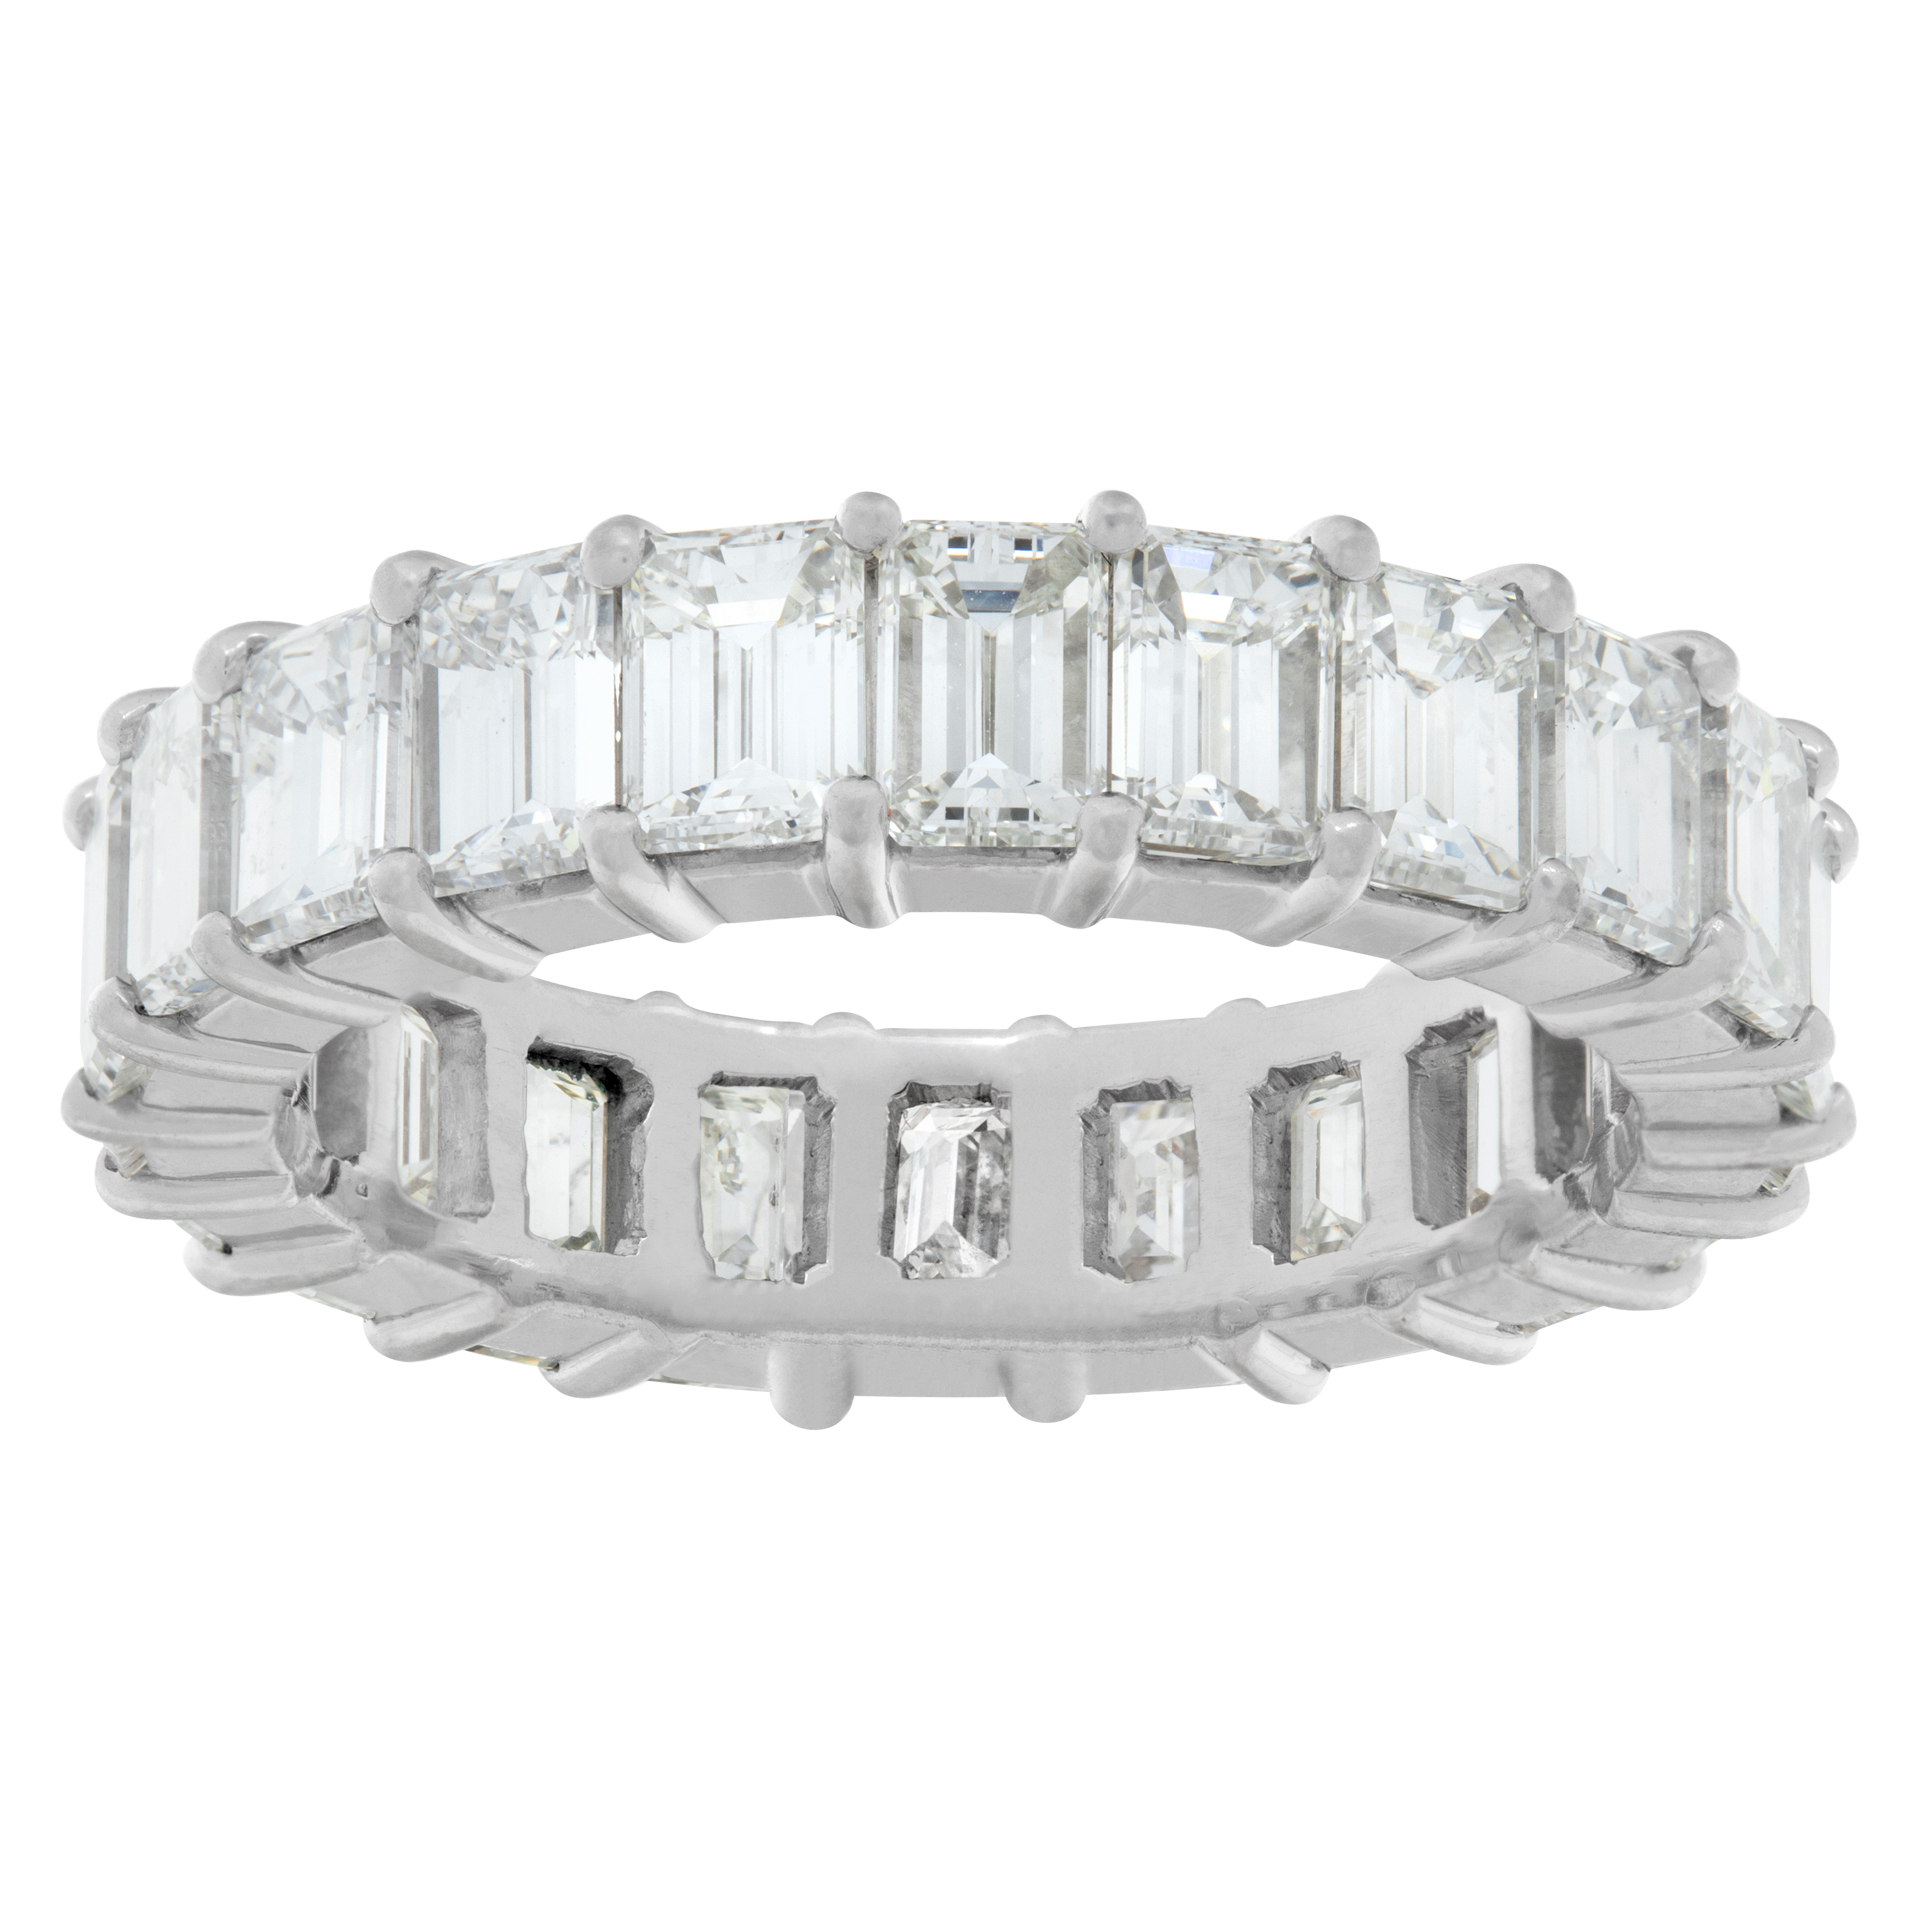 Platinum eternity band with 7.65 carats in emerald cut F-G color, VS clarity diamonds